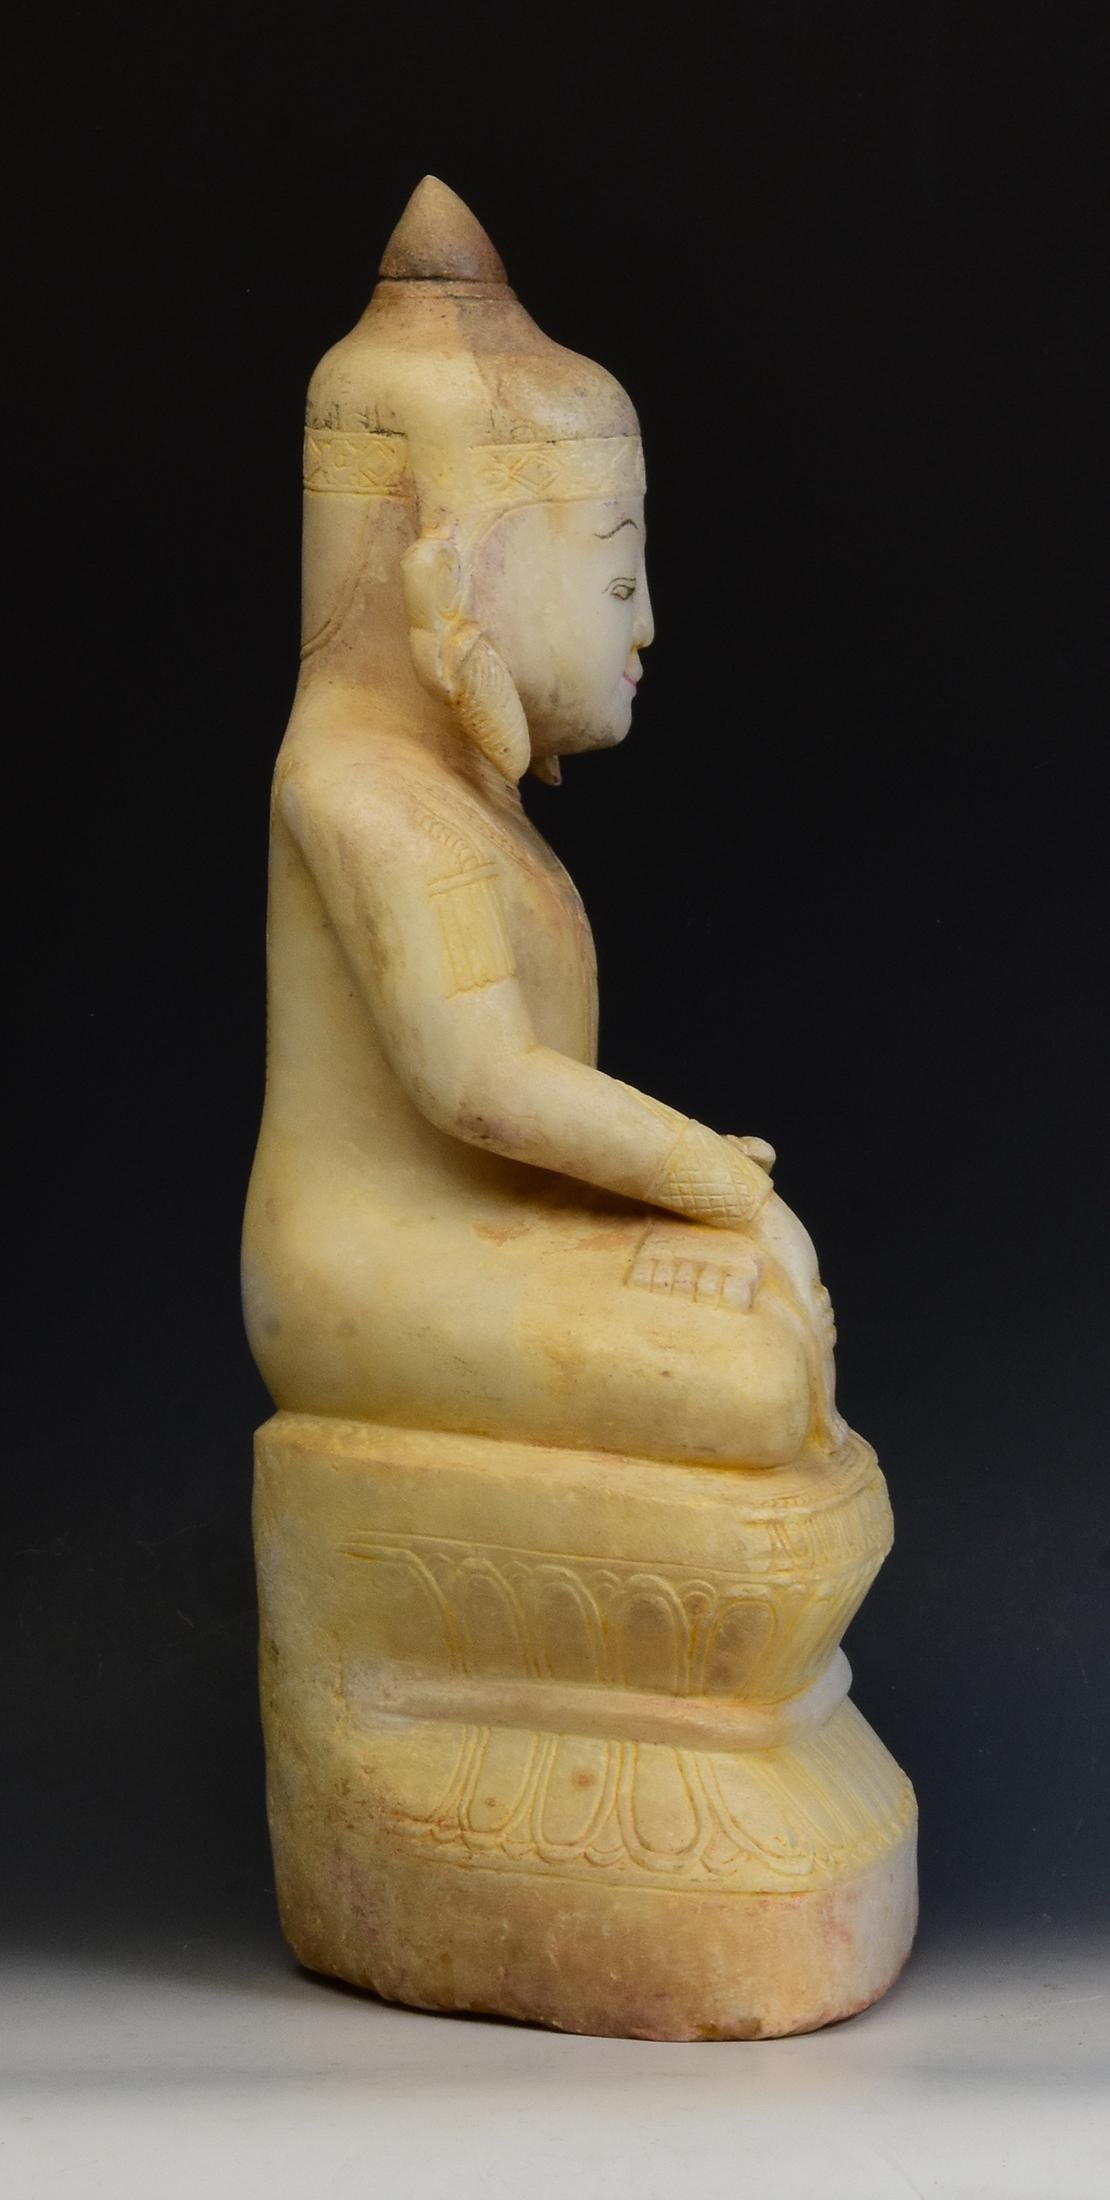 15th Century, Ava, Antique Burmese Alabaster Marble Seated Crowned Buddha Statue 13